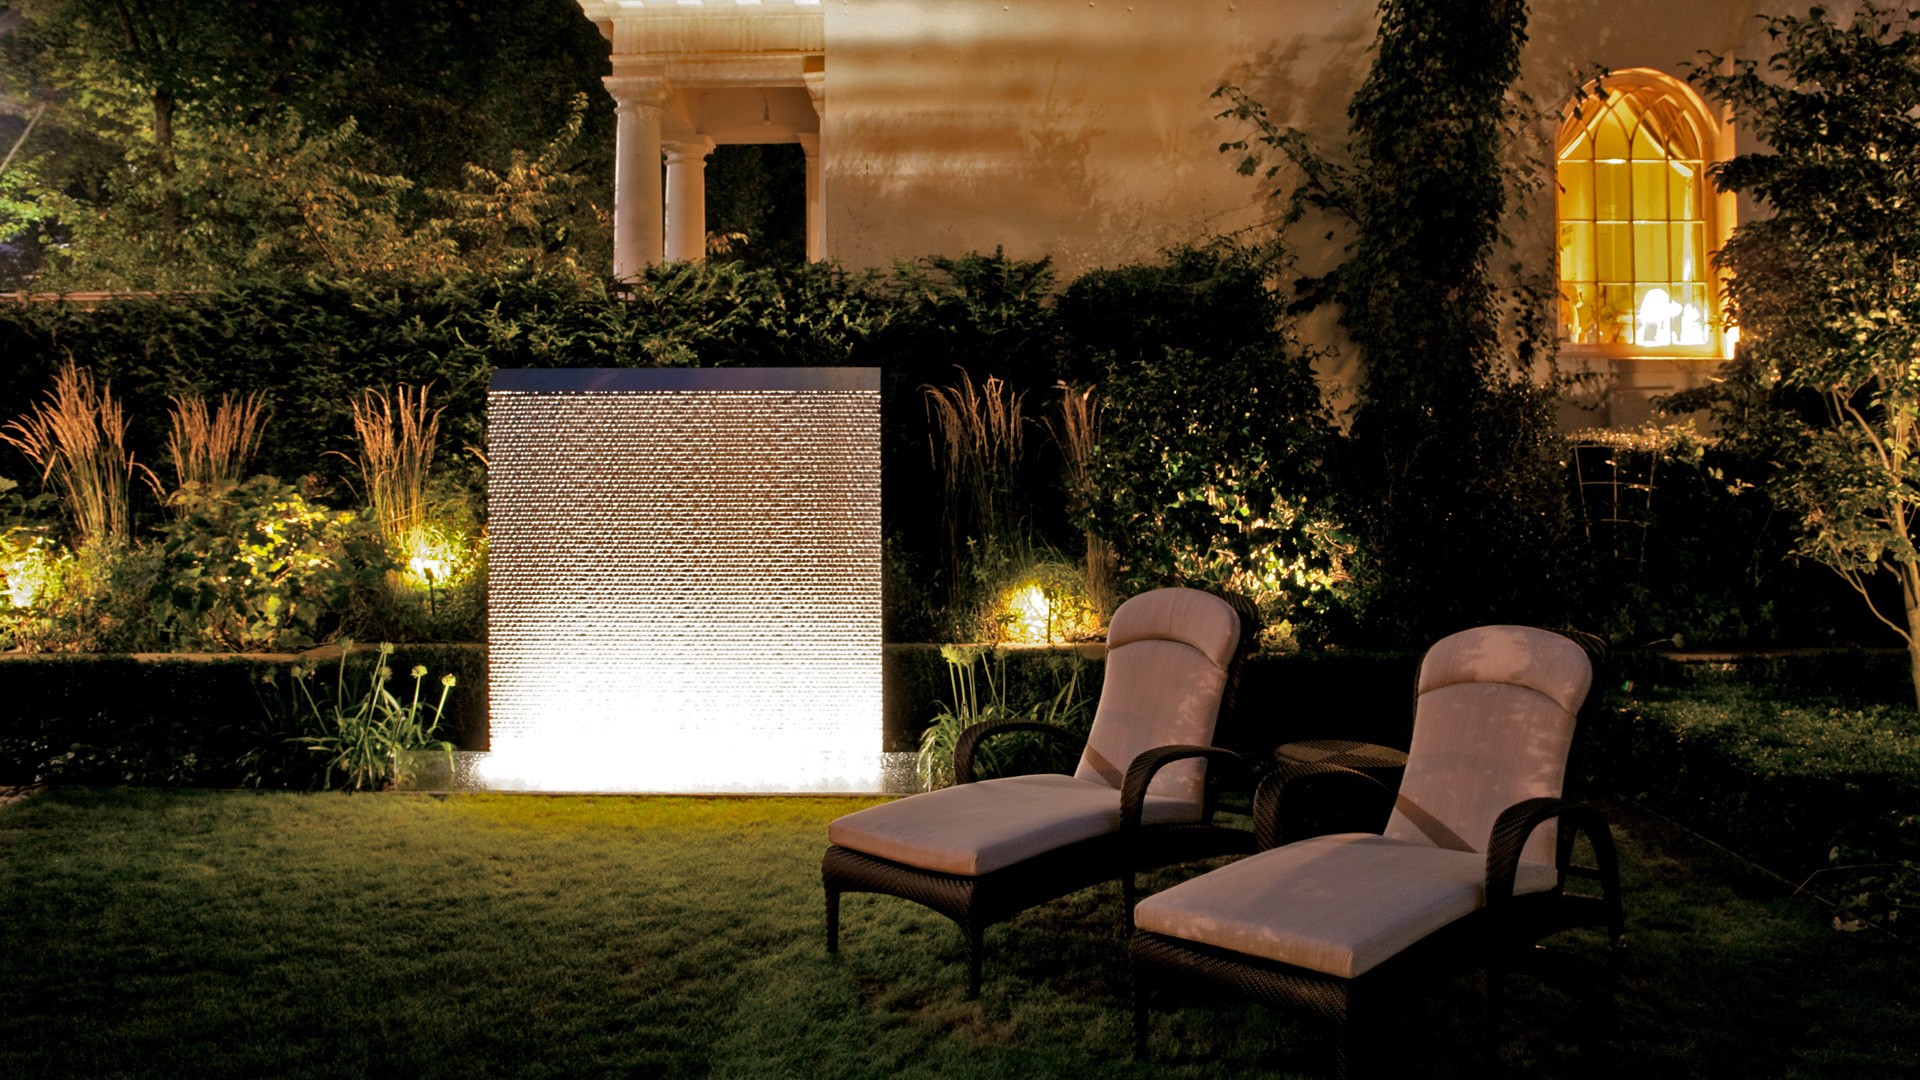 Enhance your garden’s ambiance